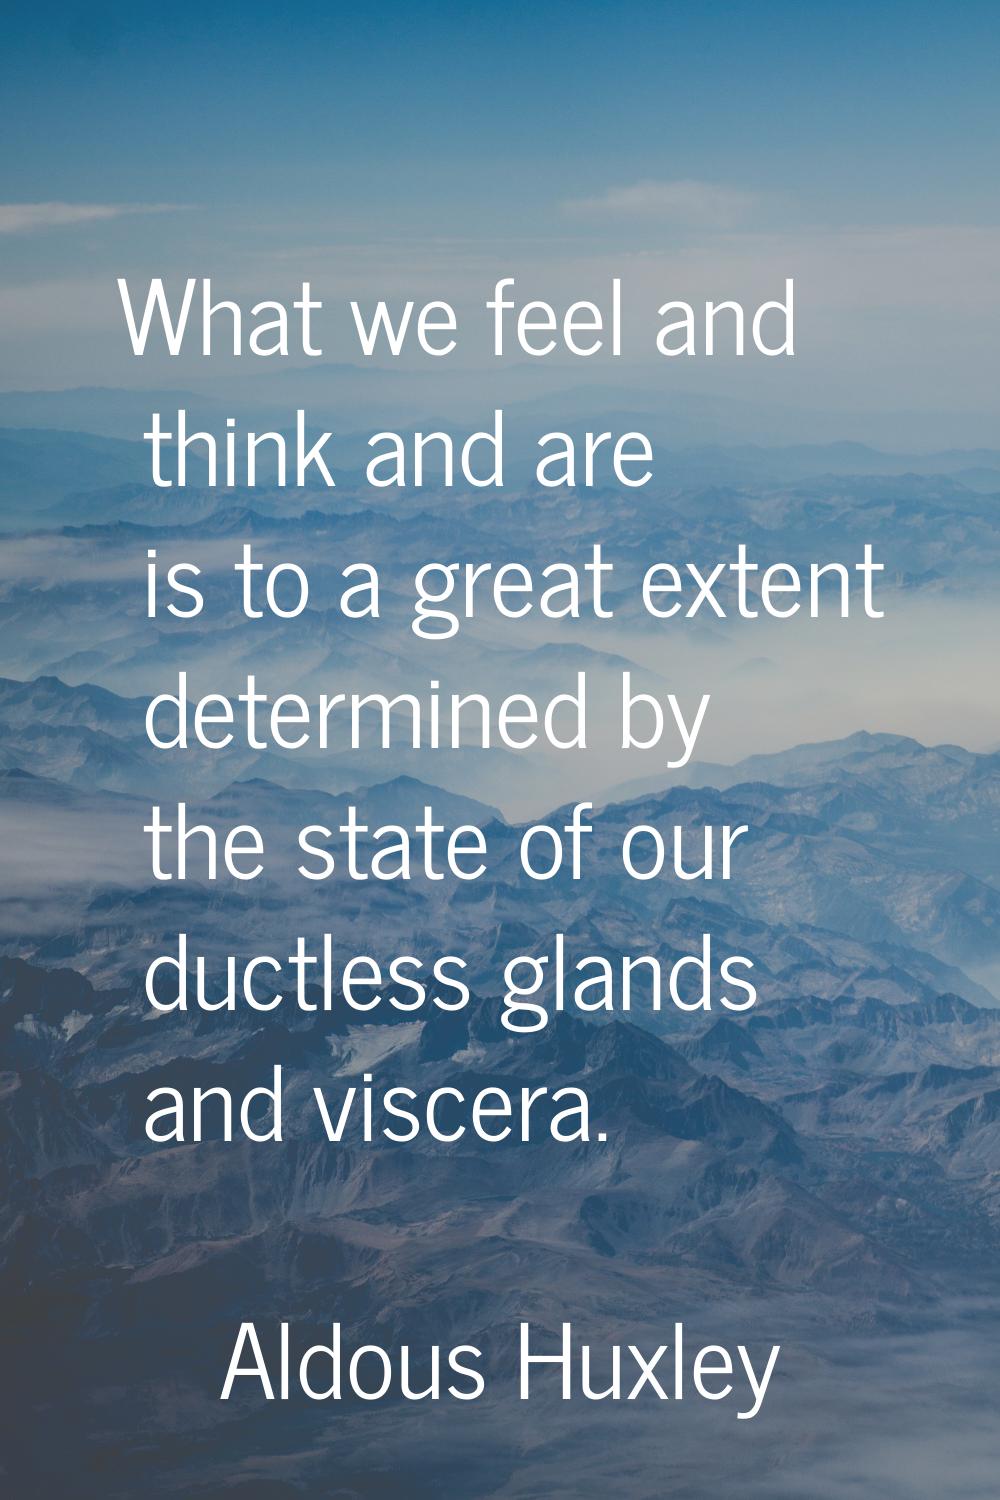 What we feel and think and are is to a great extent determined by the state of our ductless glands 